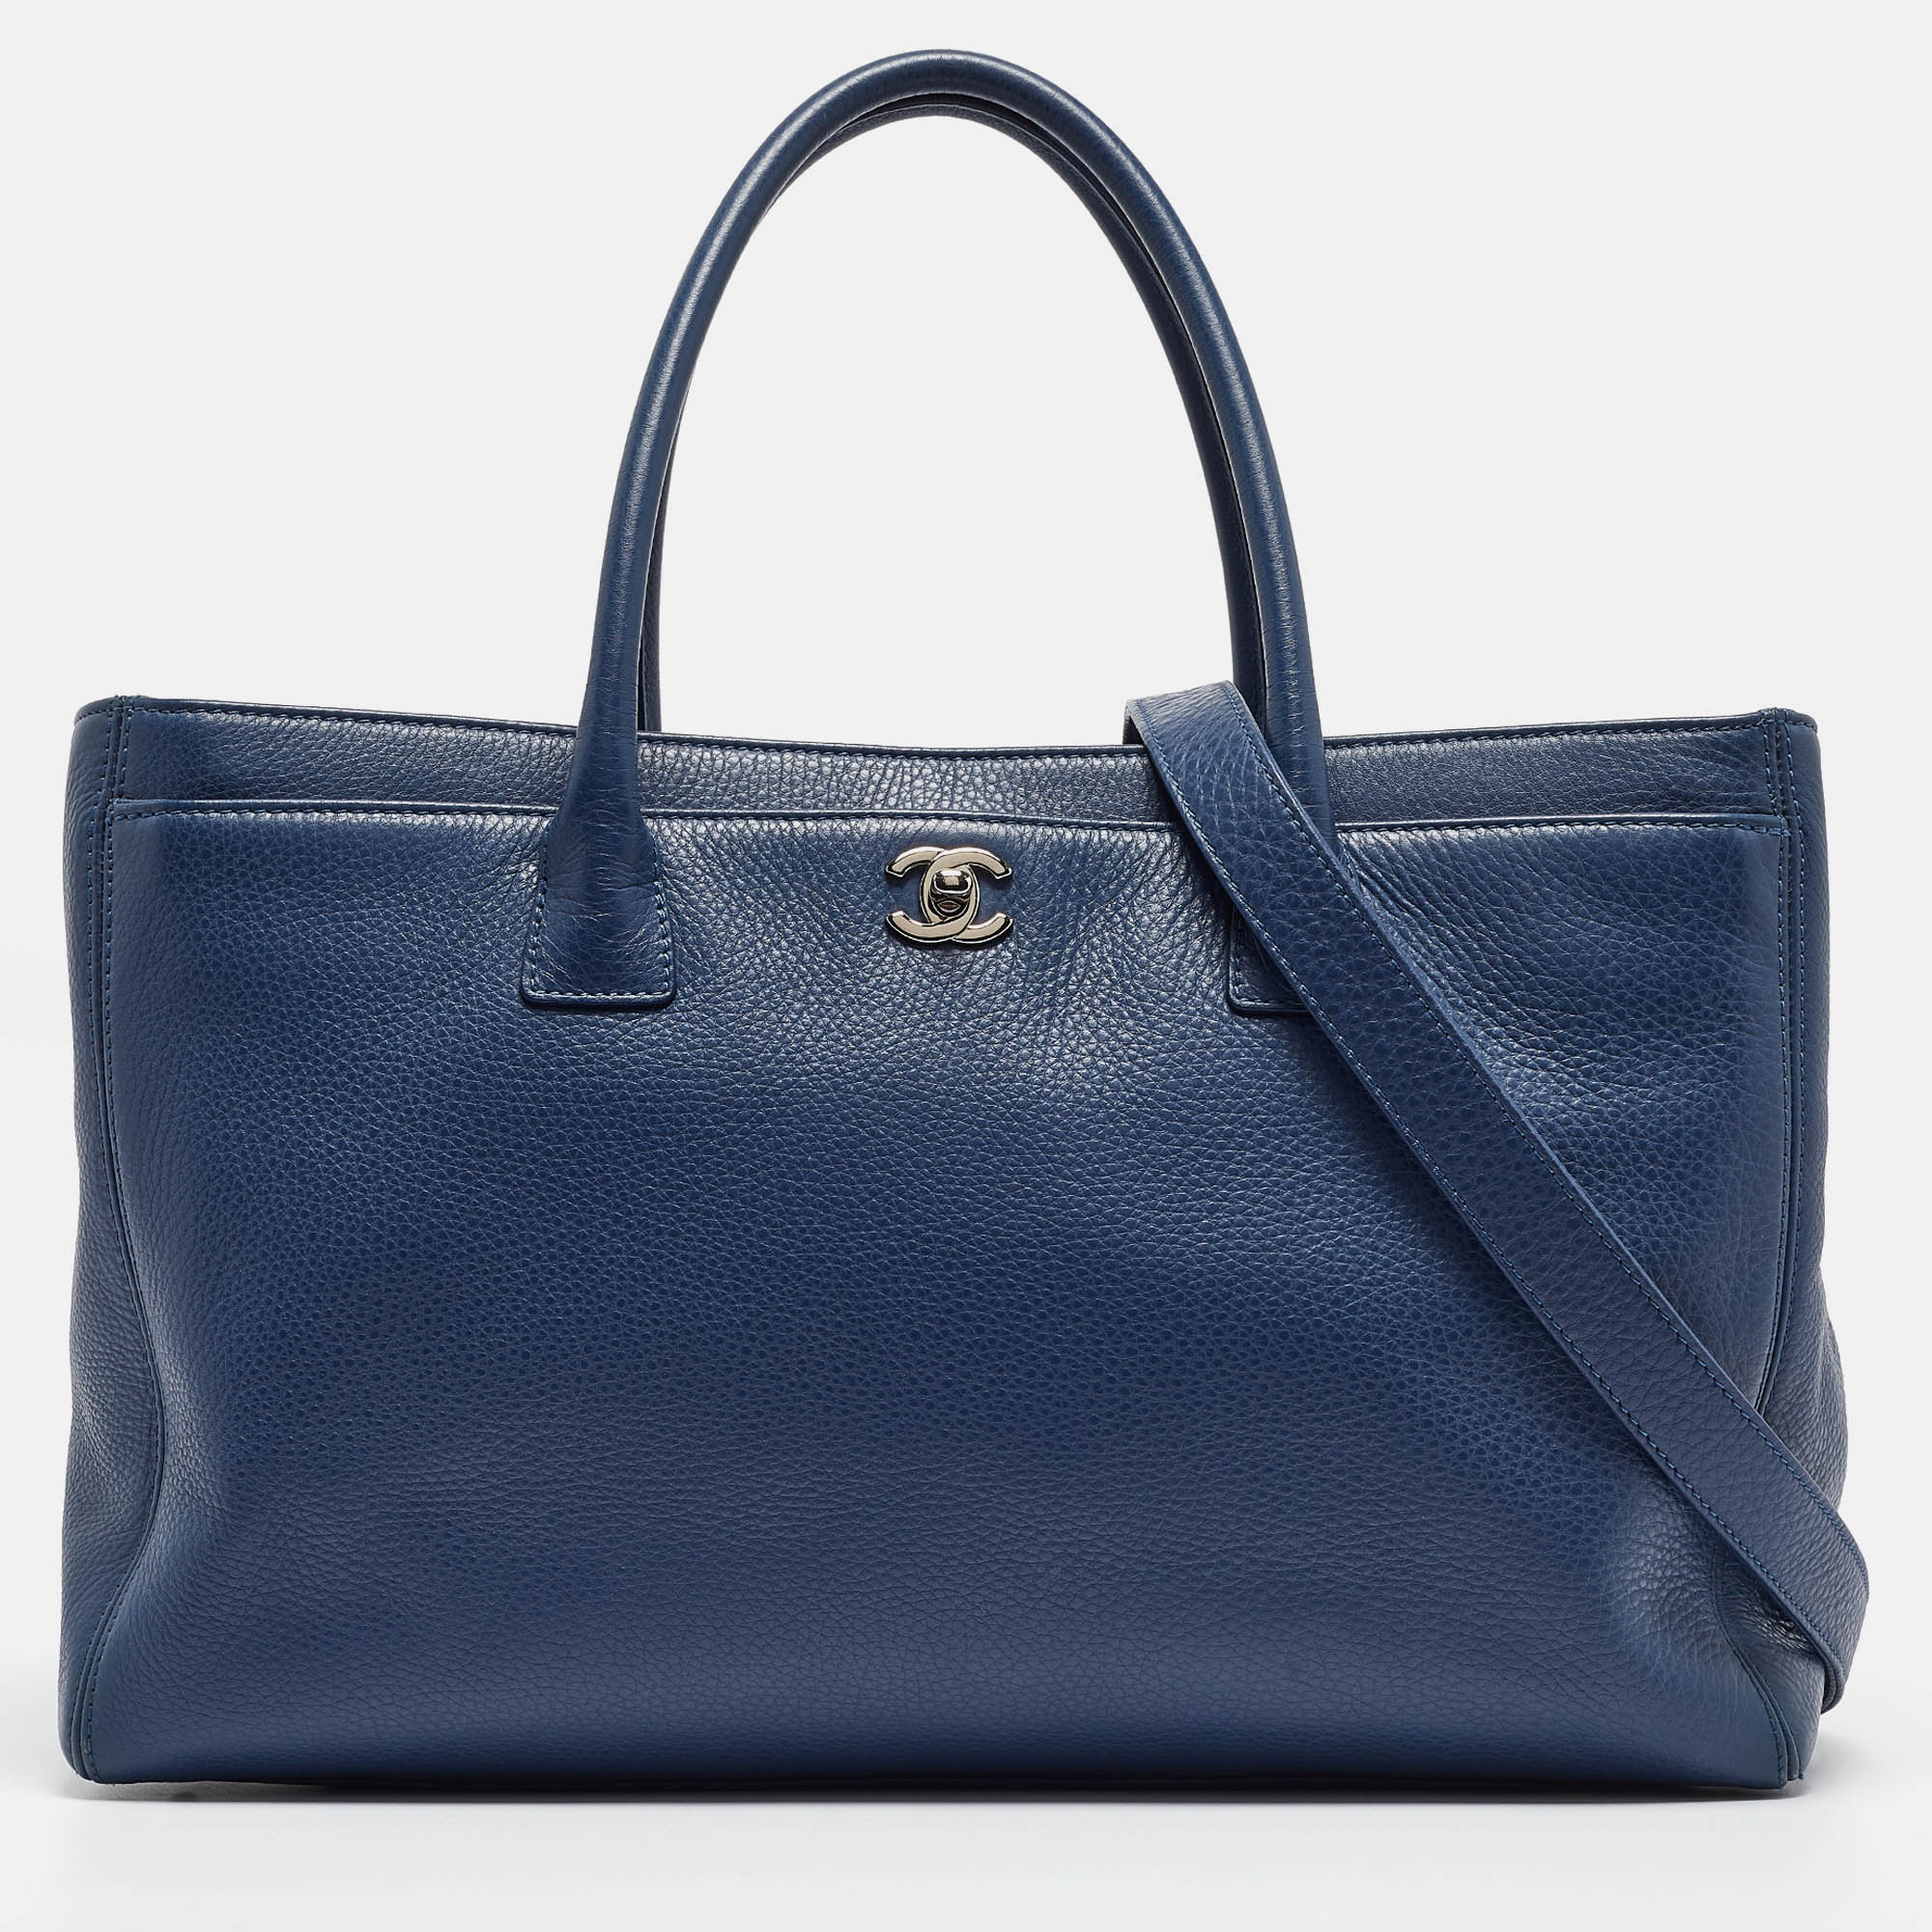 Chanel blue leather cerf executive shopper tote